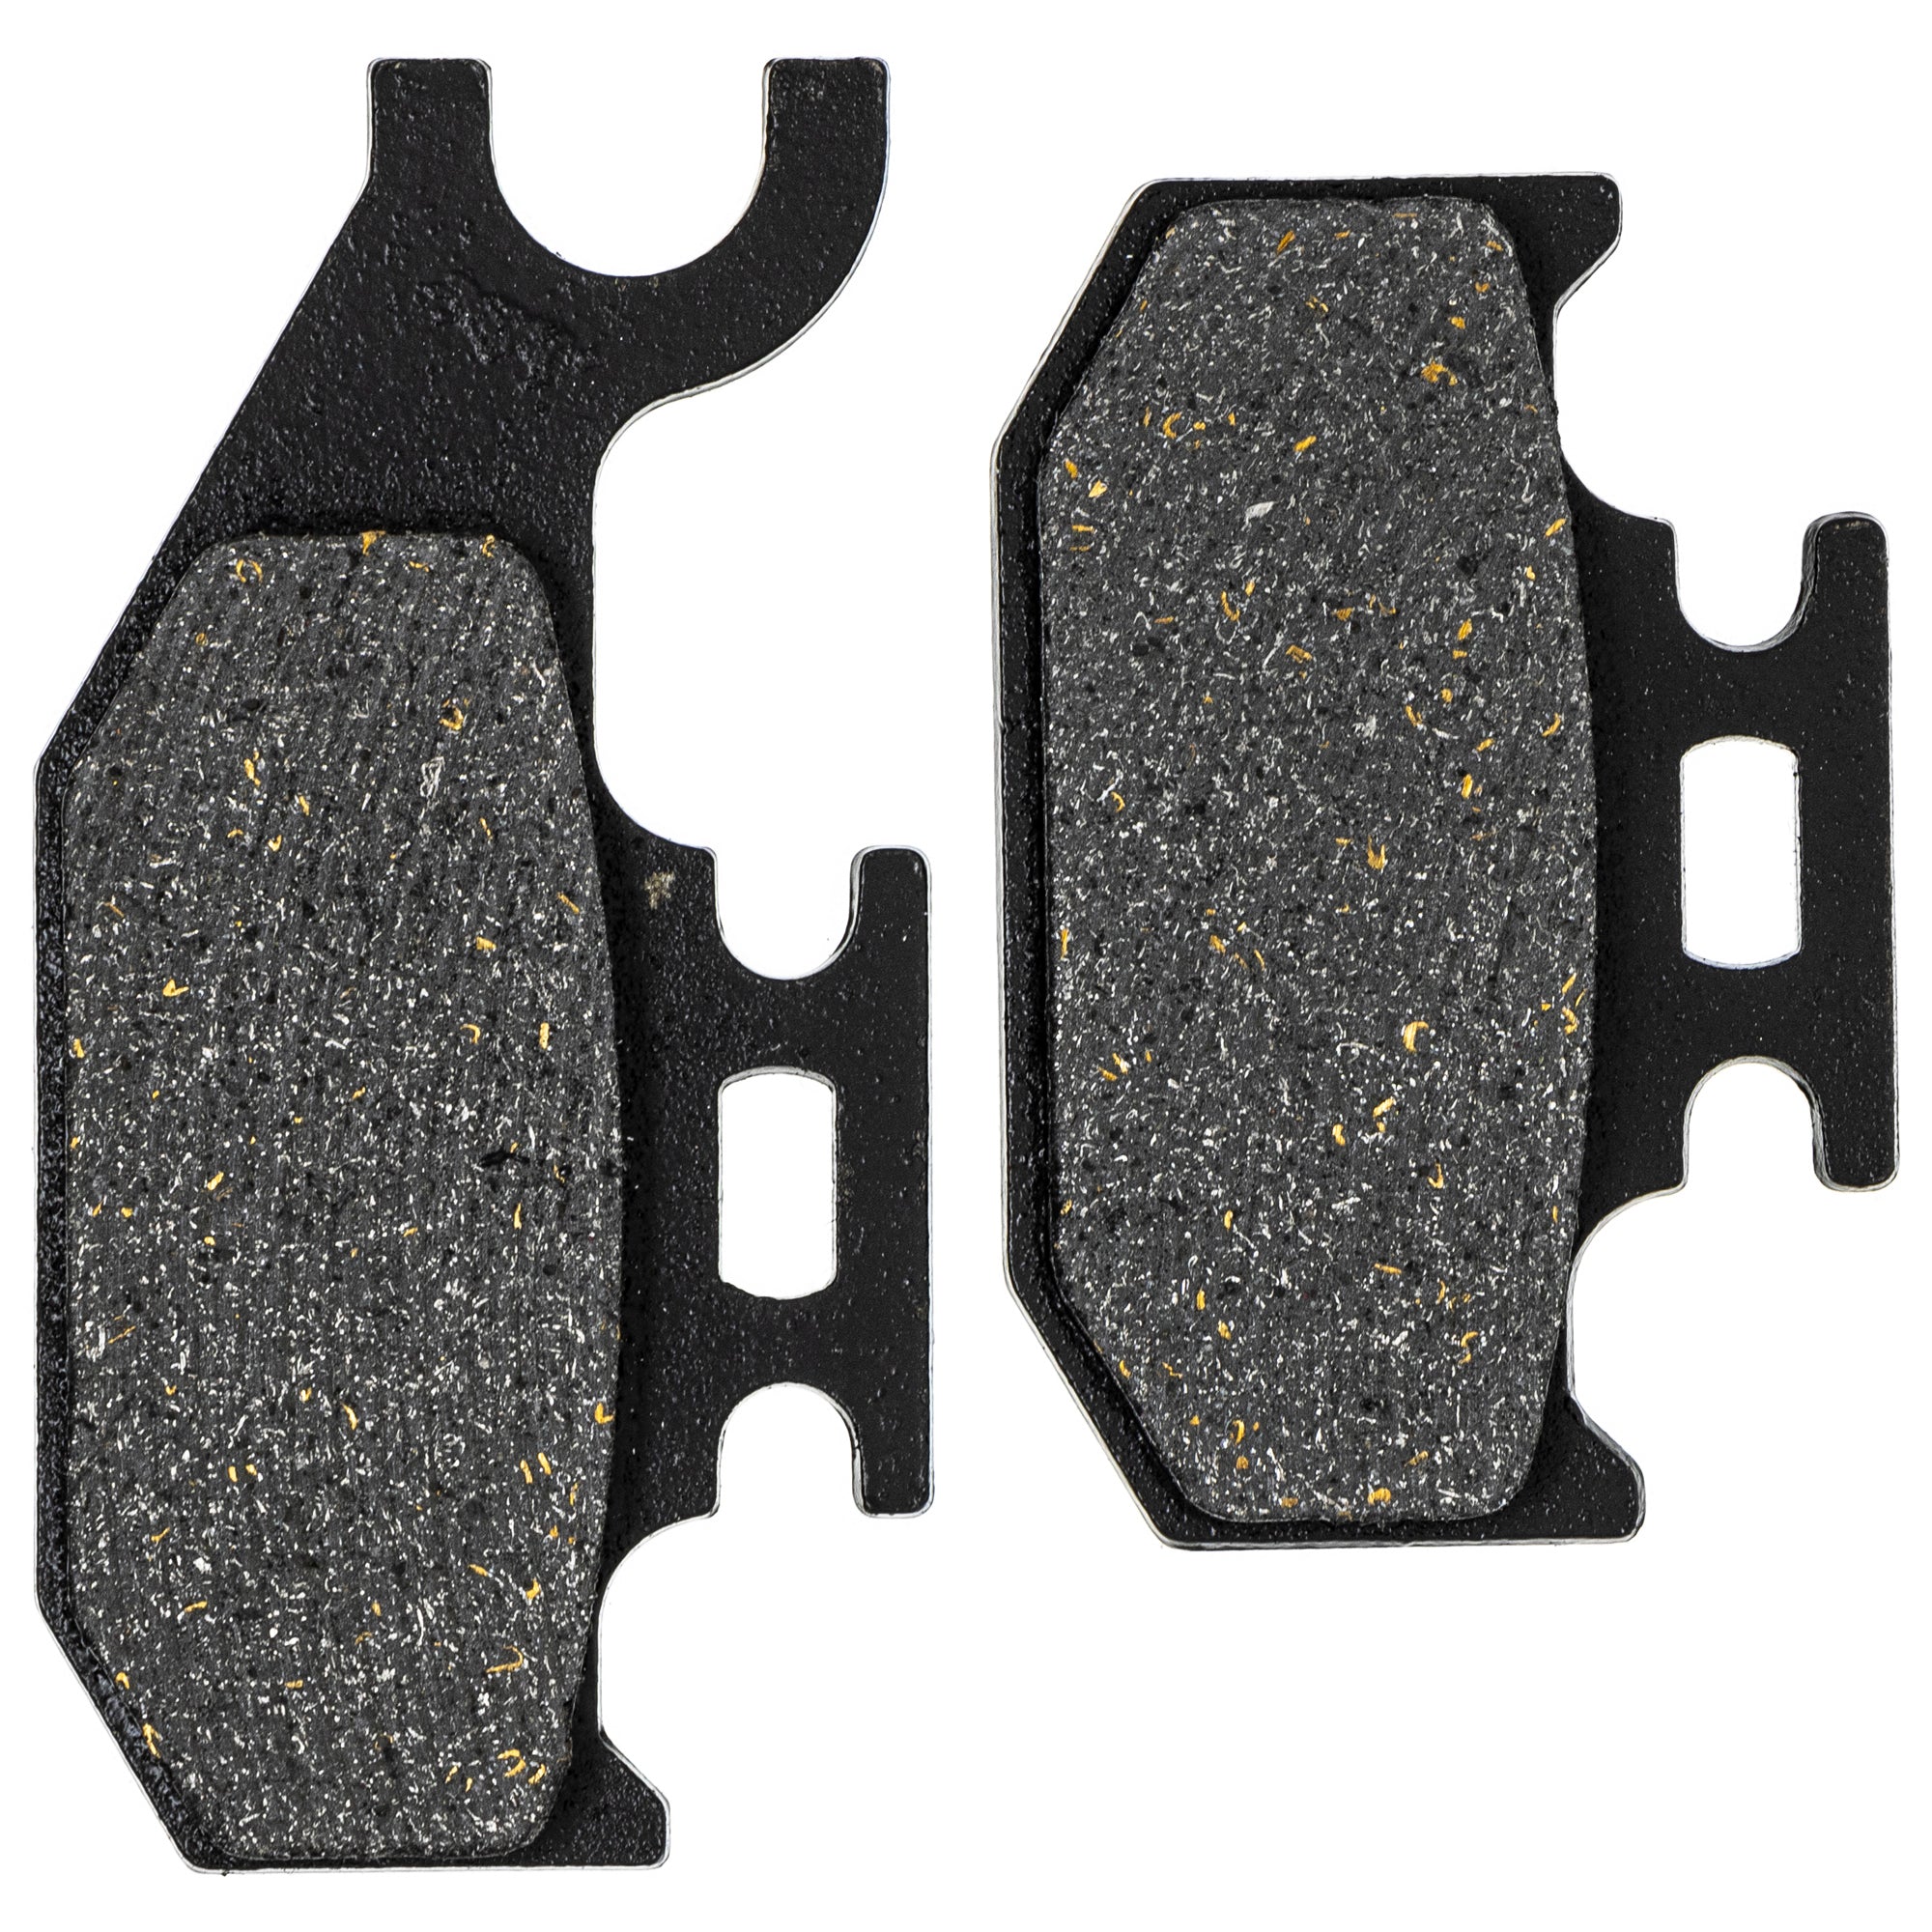 Brake Pad Kit for Can-Am 705600398 705601147 705600350 Front Rear